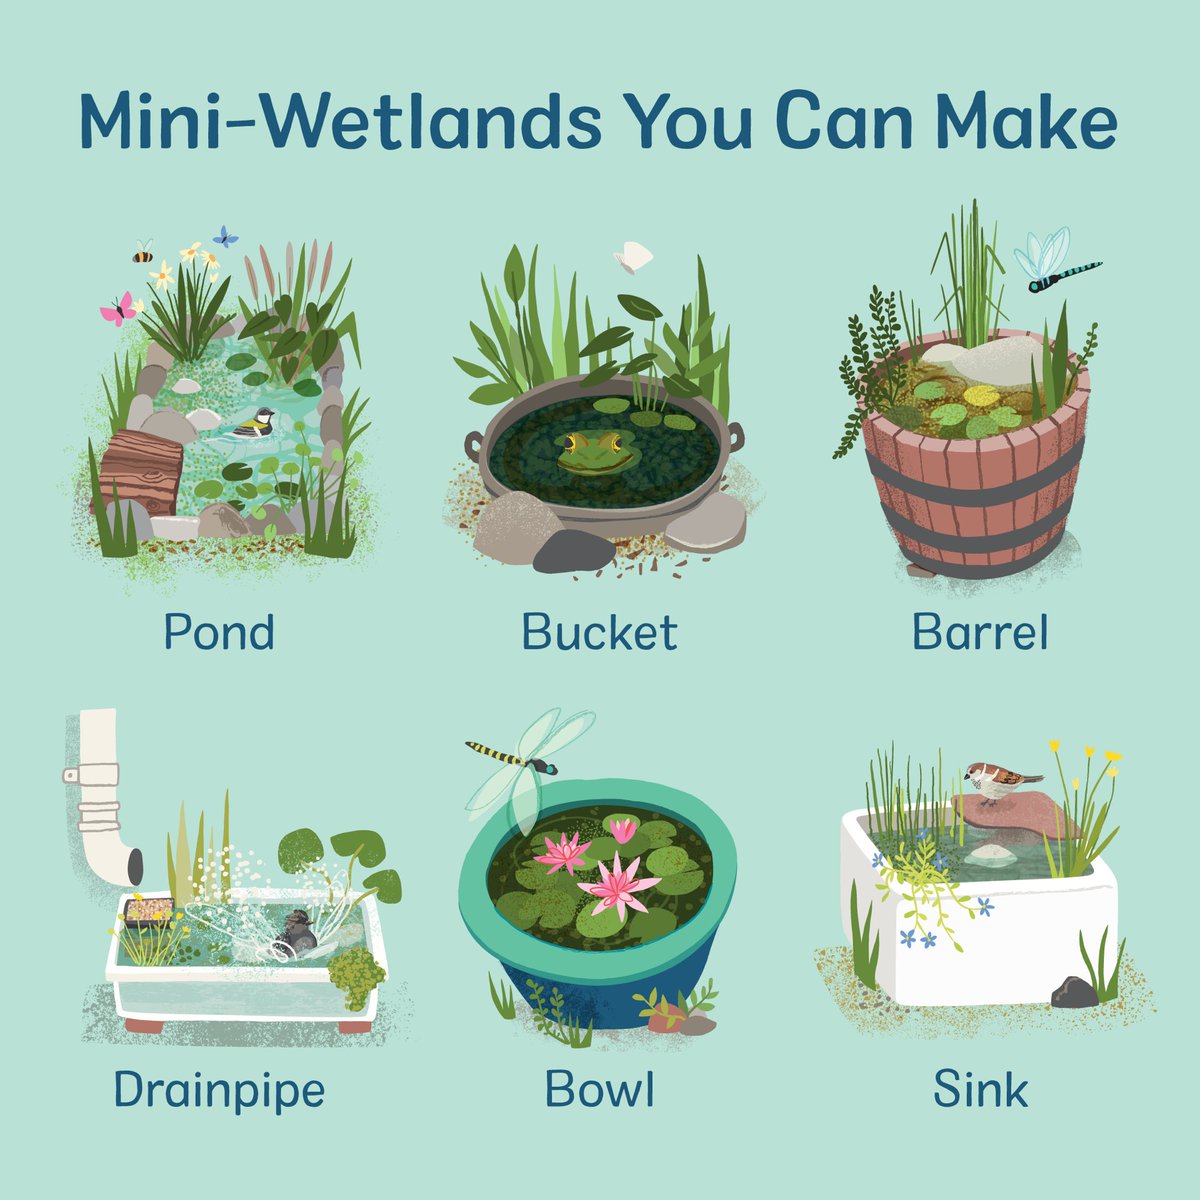 Be a good neighbour to nature! 🐸🦋🦔 Mini-wetlands come in all shapes and sizes, but they all make a BIG difference to local wildlife. Here's how to make your own 👉 ow.ly/imZo50Pv4pL #MiniWetlands #WetlandsCan